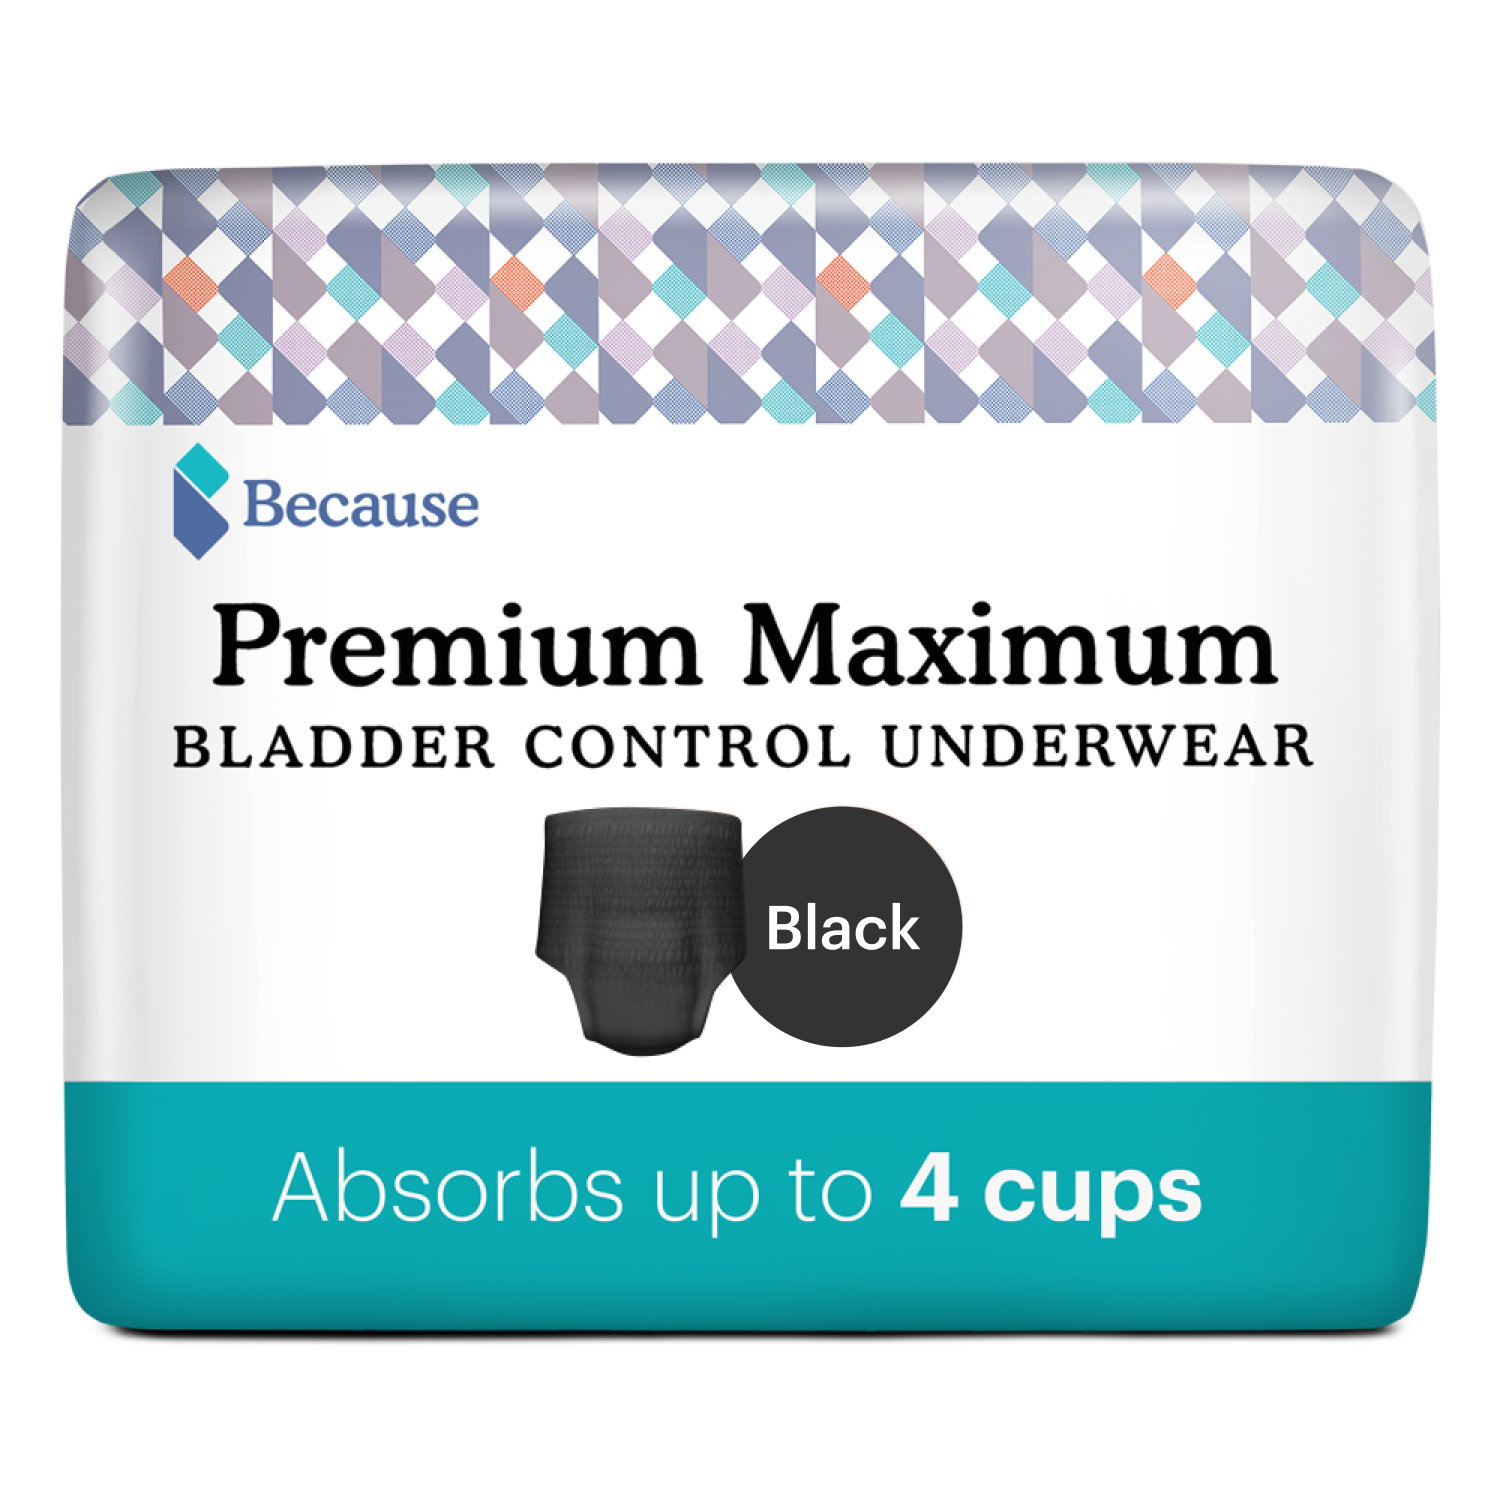 Save on Always Women's Discreet Incontinence Underwear Sensitive Skin  Maximum+ L Order Online Delivery